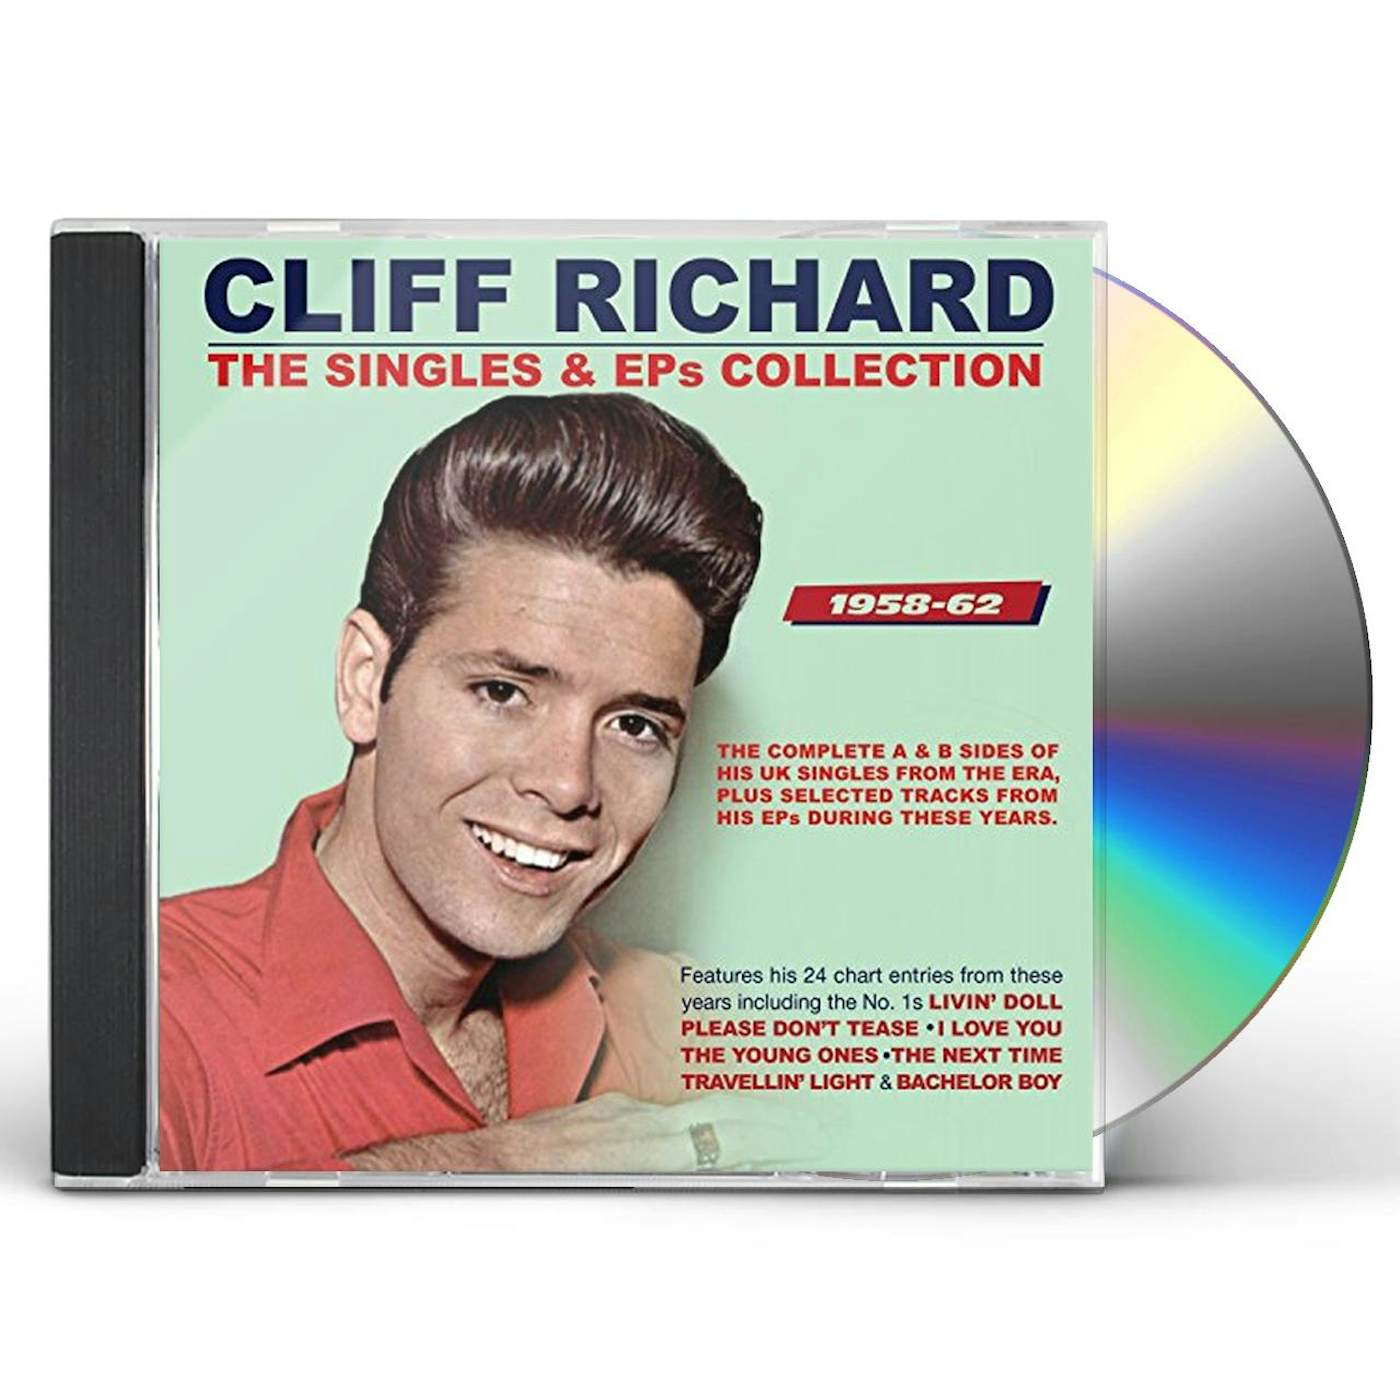 Cliff Richard SINGLES & EPS COLLECTION 1958-62 CD